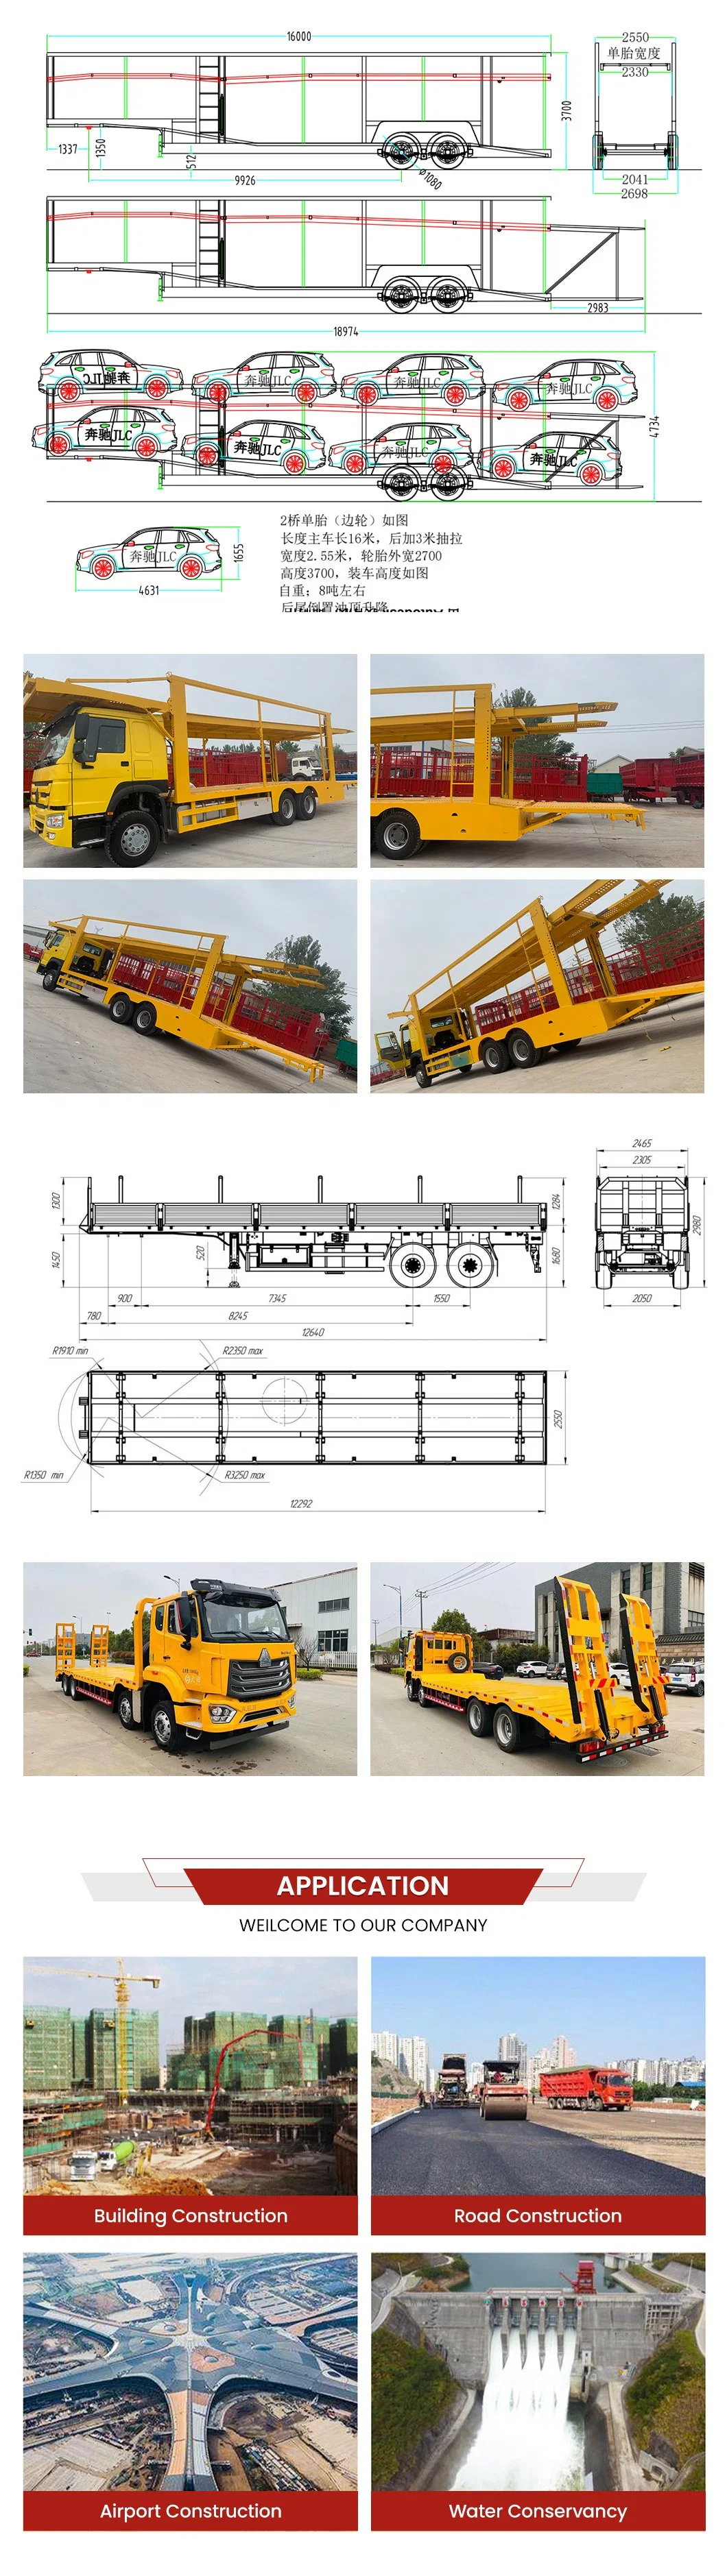 Anton Plate Production, The Main Hook Machine Frame Is Made, Custom Make All Kinds of Vehicles